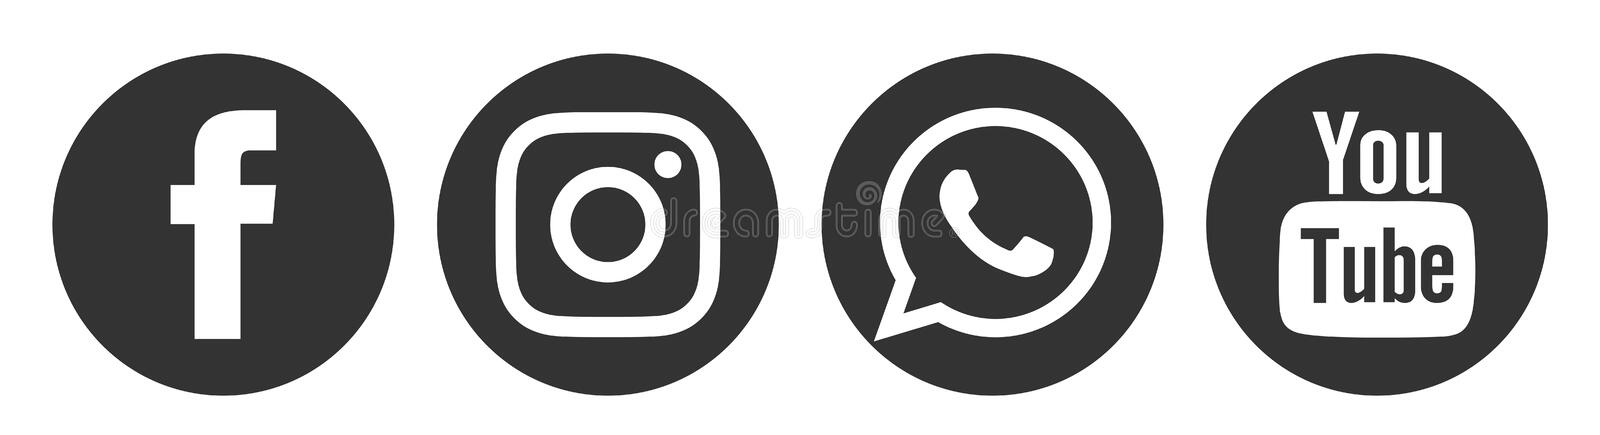 Instagram Logo Black And White Png